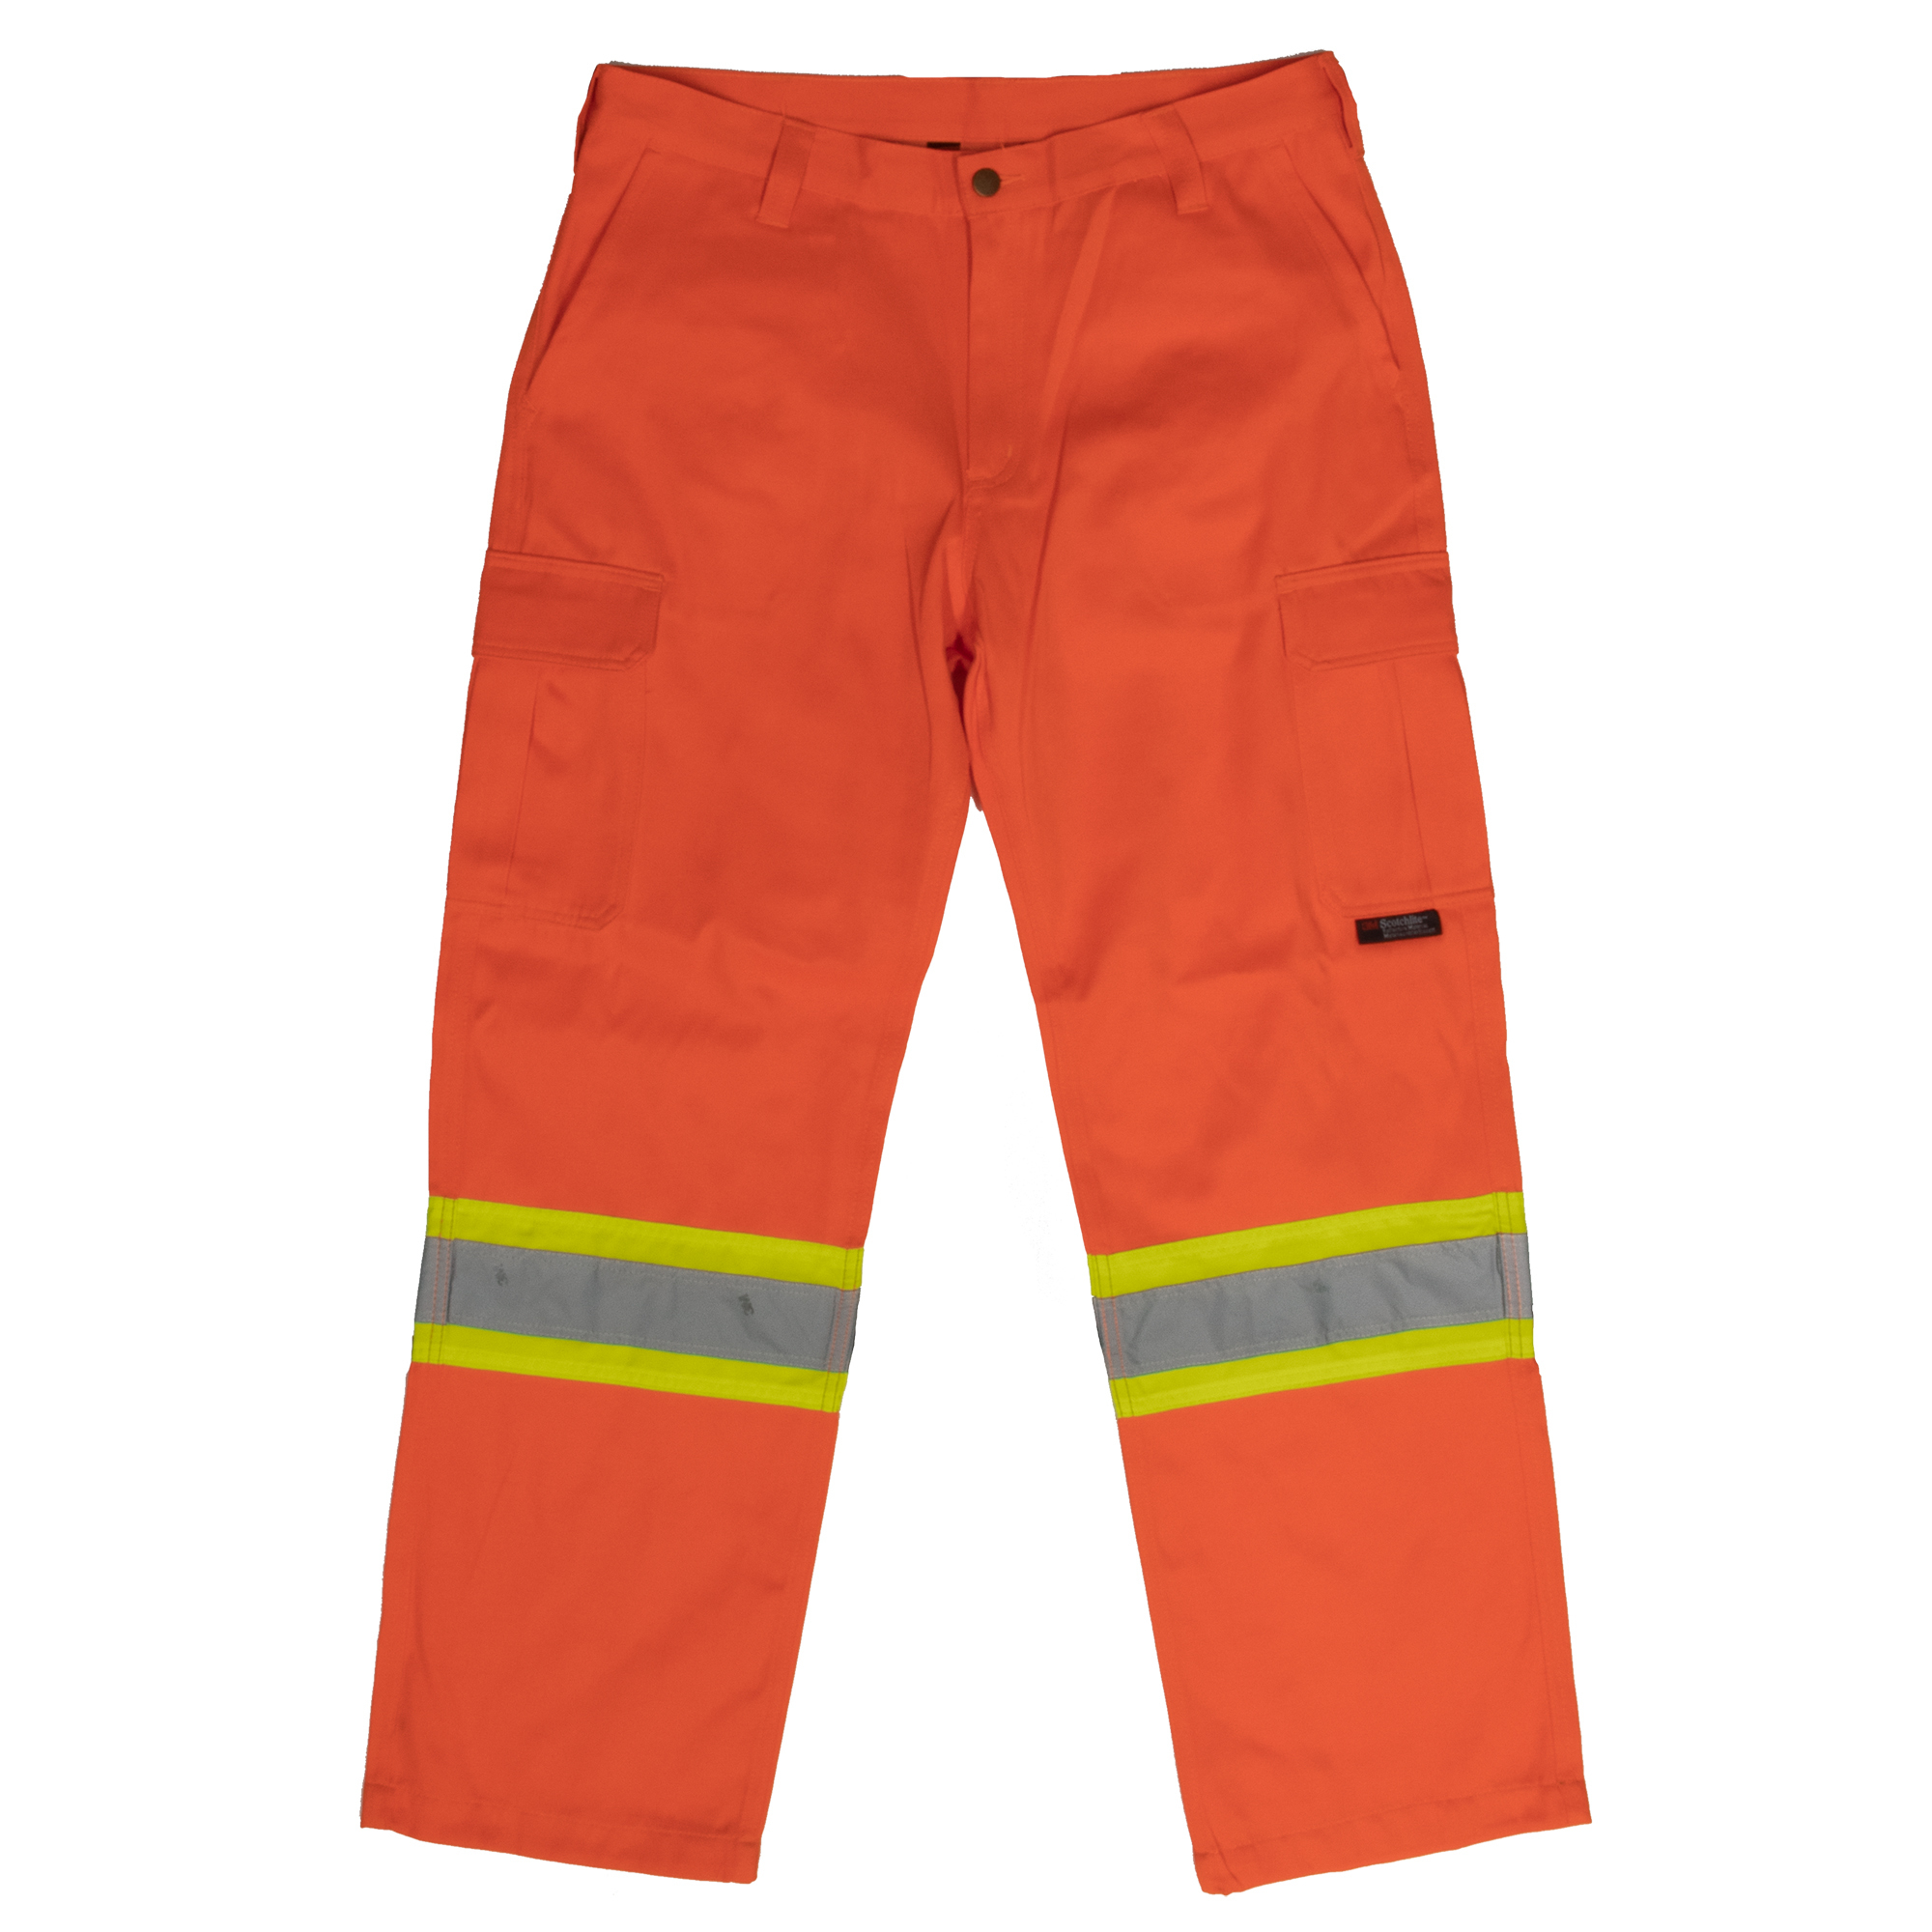 Tough Duck, Safety Cargo Work Pant, Waist 44 in, Inseam 30 in, Color Fluorescent Orange, Model SP010